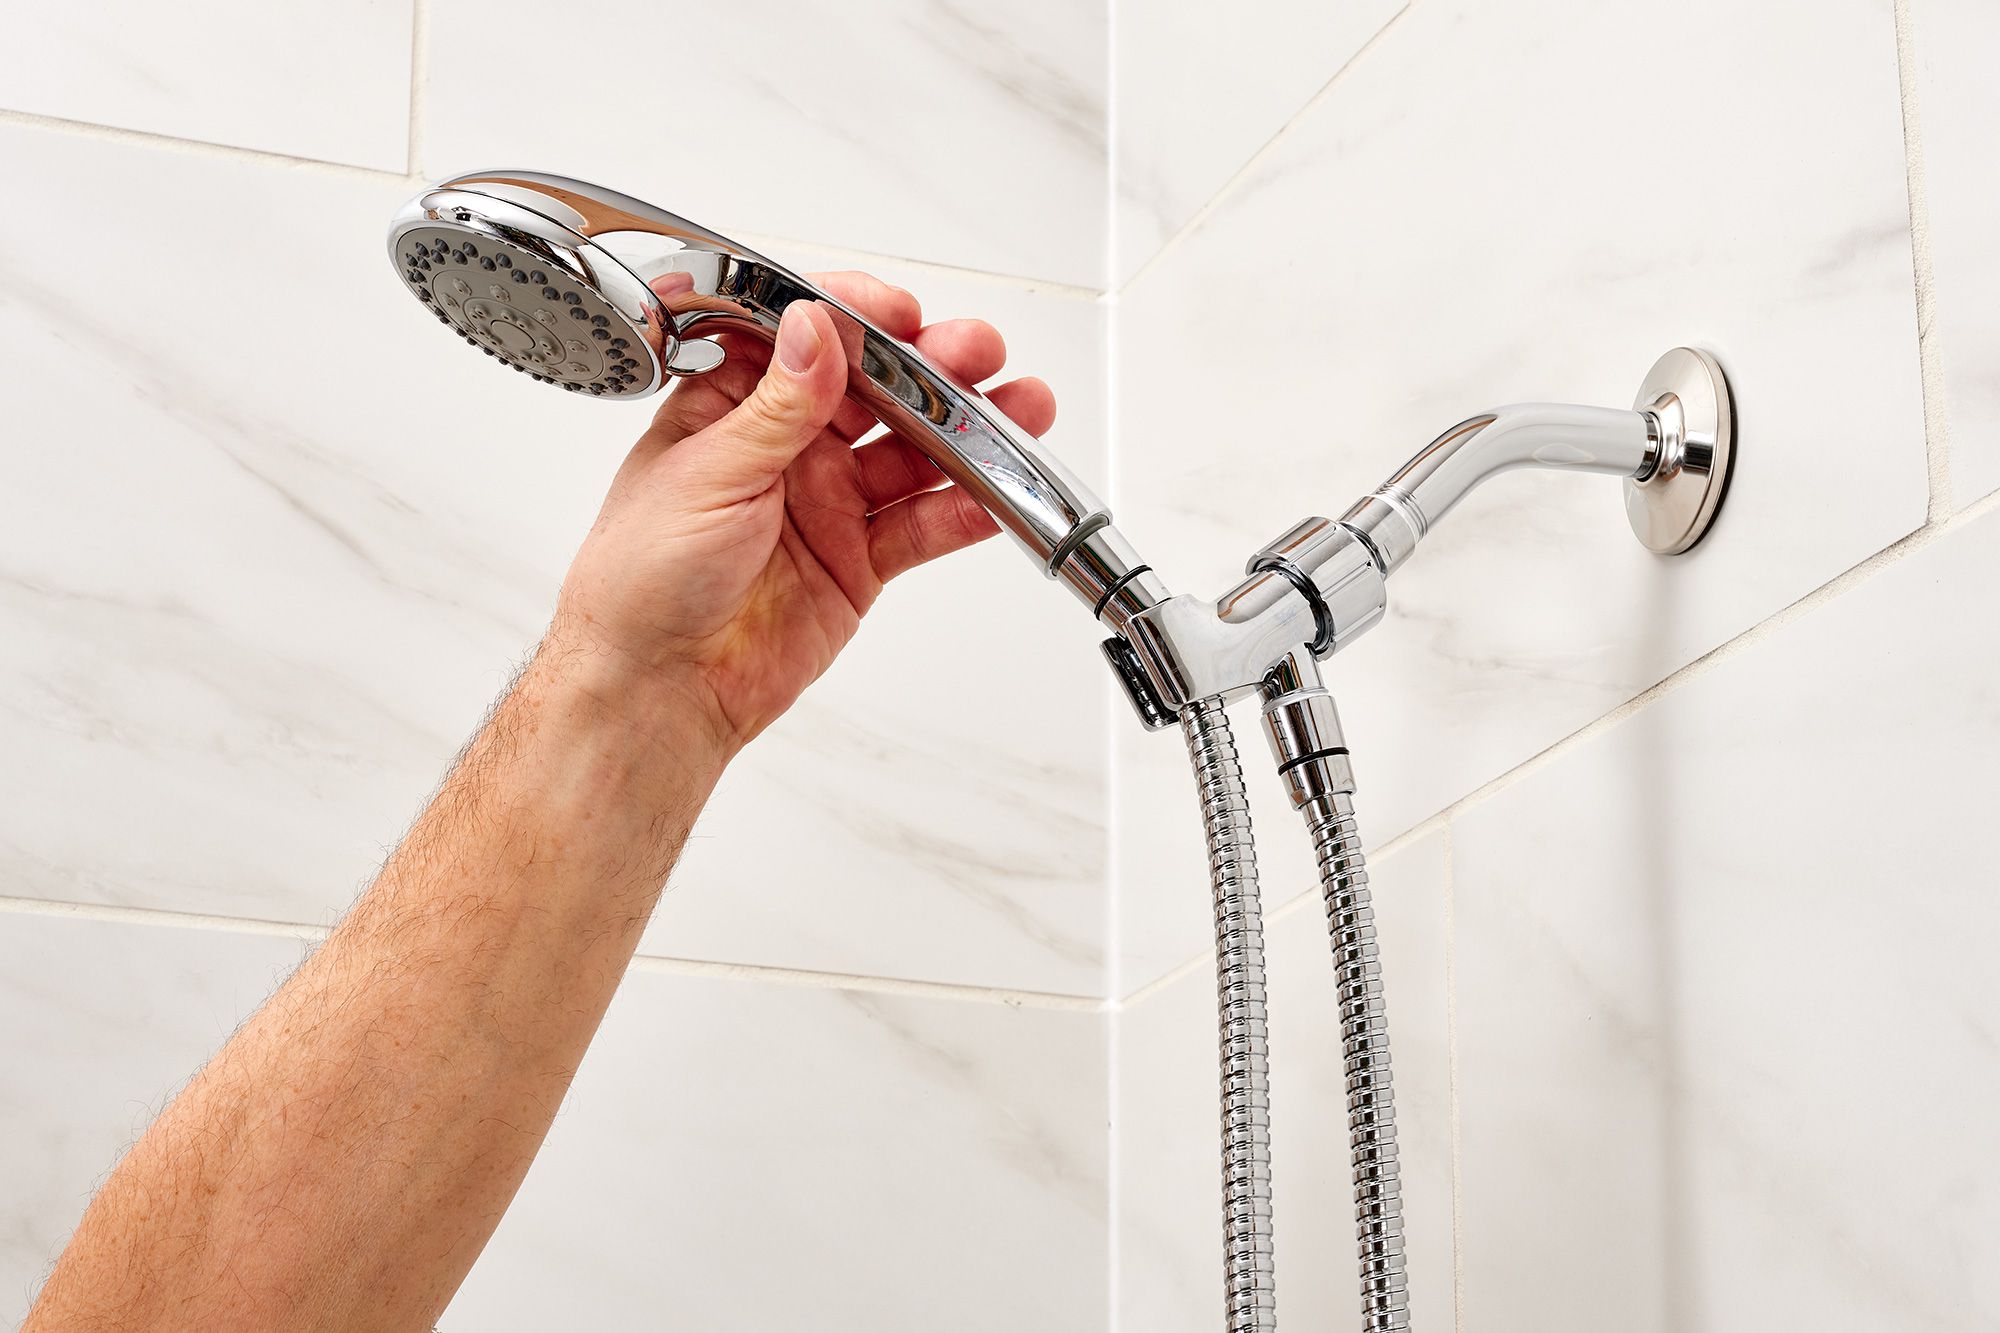 How To Install A Handheld Shower Head